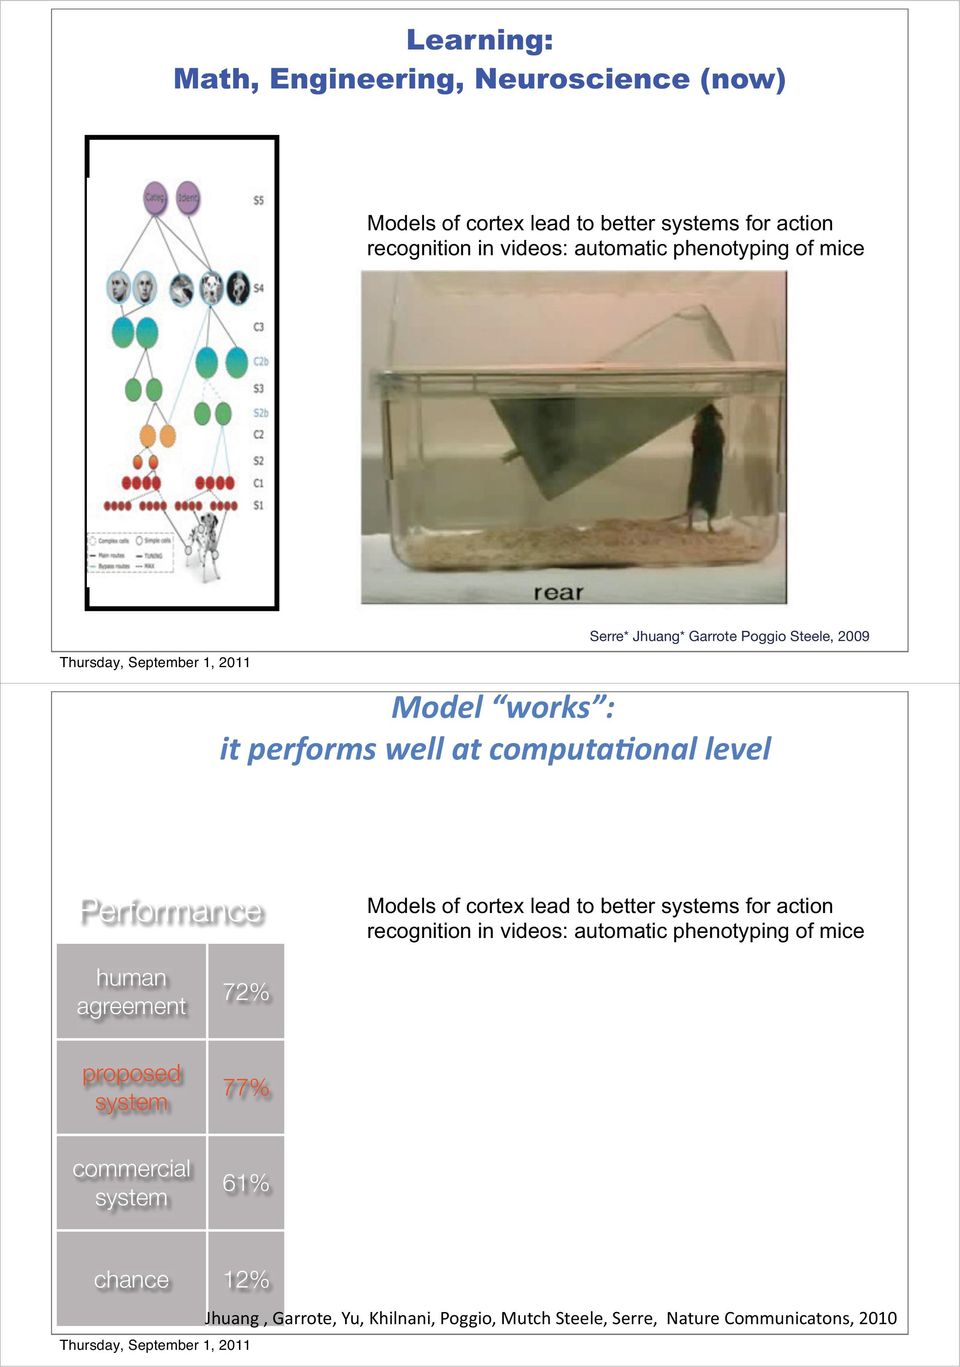 cortex lead to better systems for action recognition in videos: automatic phenotyping of mice human agreement 72% proposed system 77% commercial system 61% chance 12%